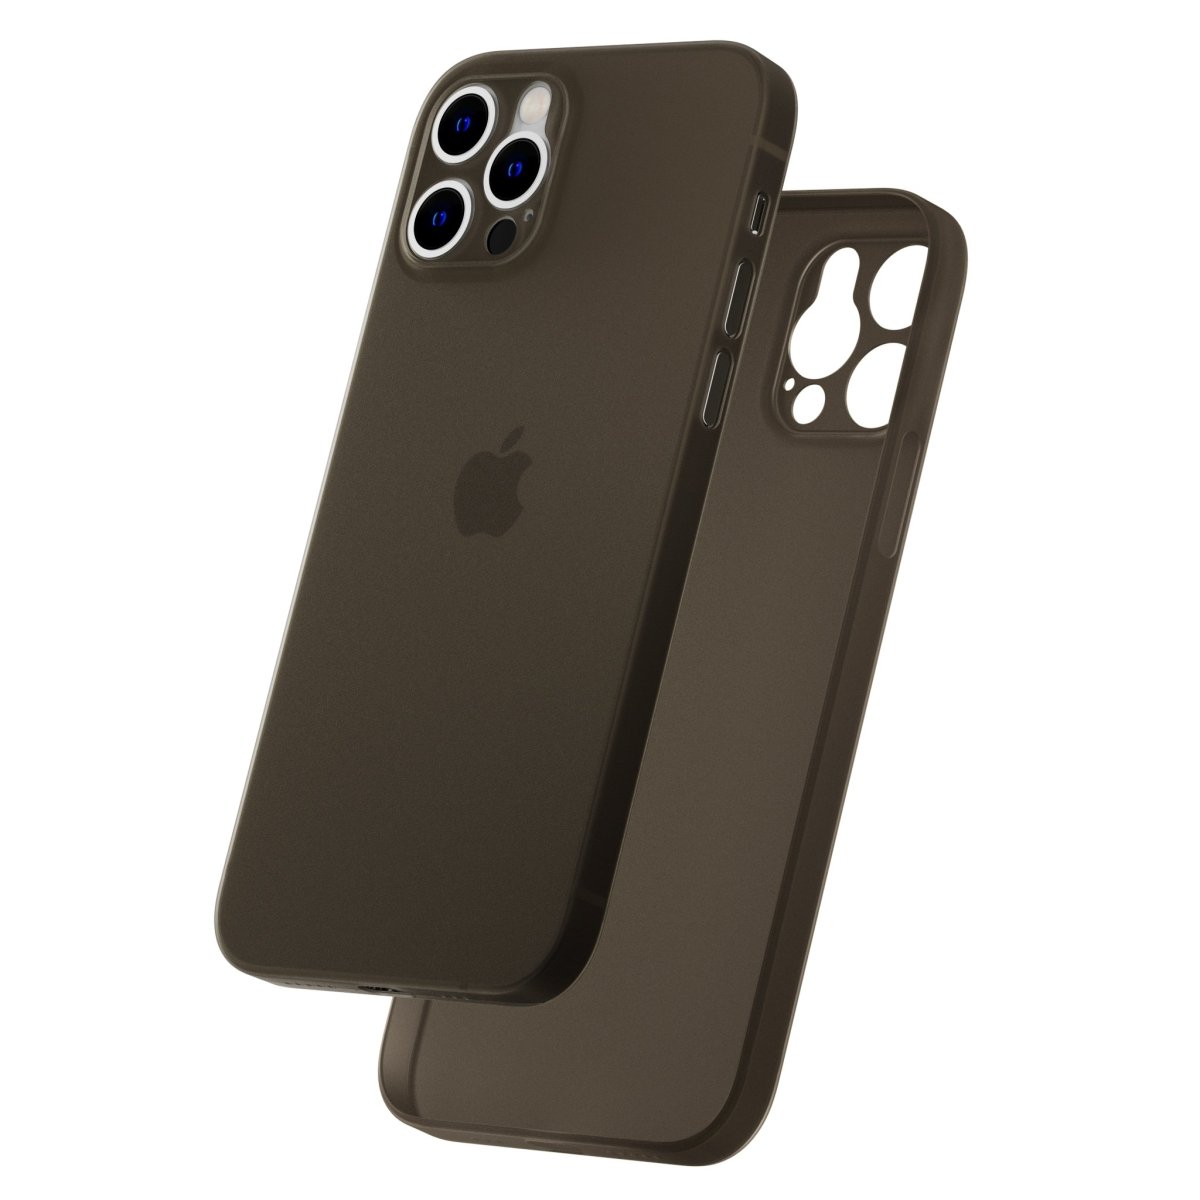 Slimcase Mobile Back Cover for iPhone 12 Pro - Slimcase IndiaCase